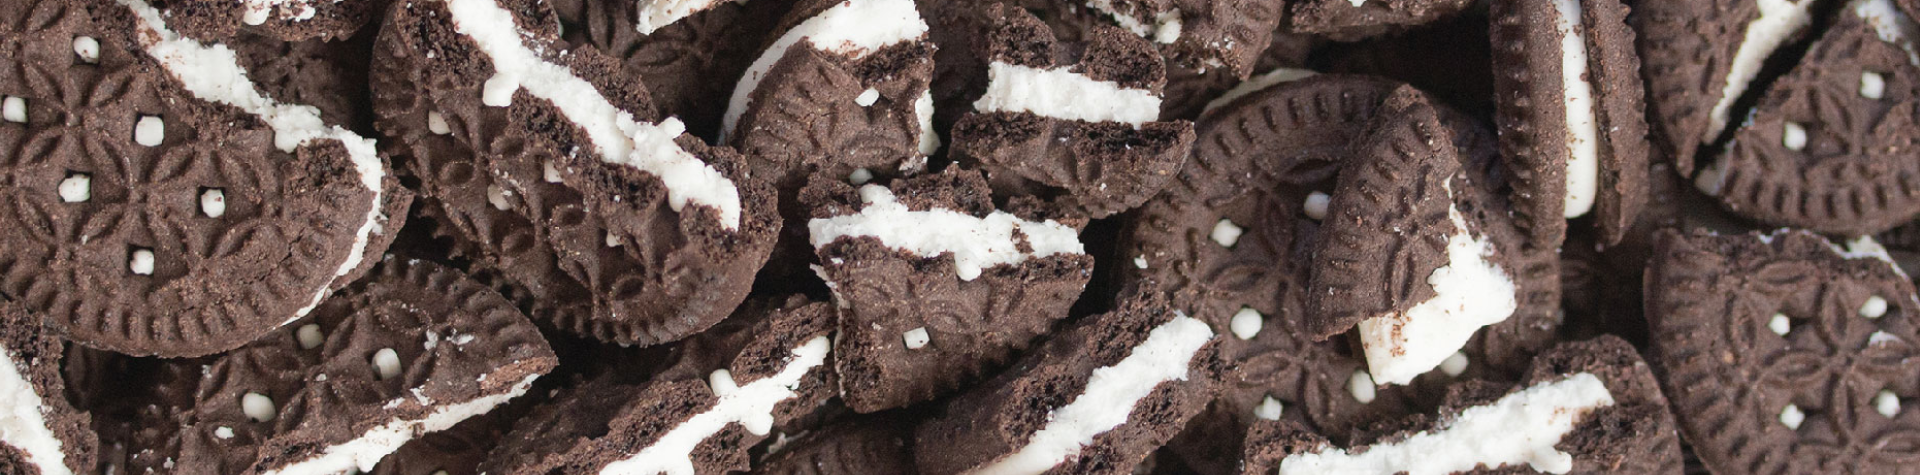 broken cookies and cream cookies piled up to create a delicious looking banner image